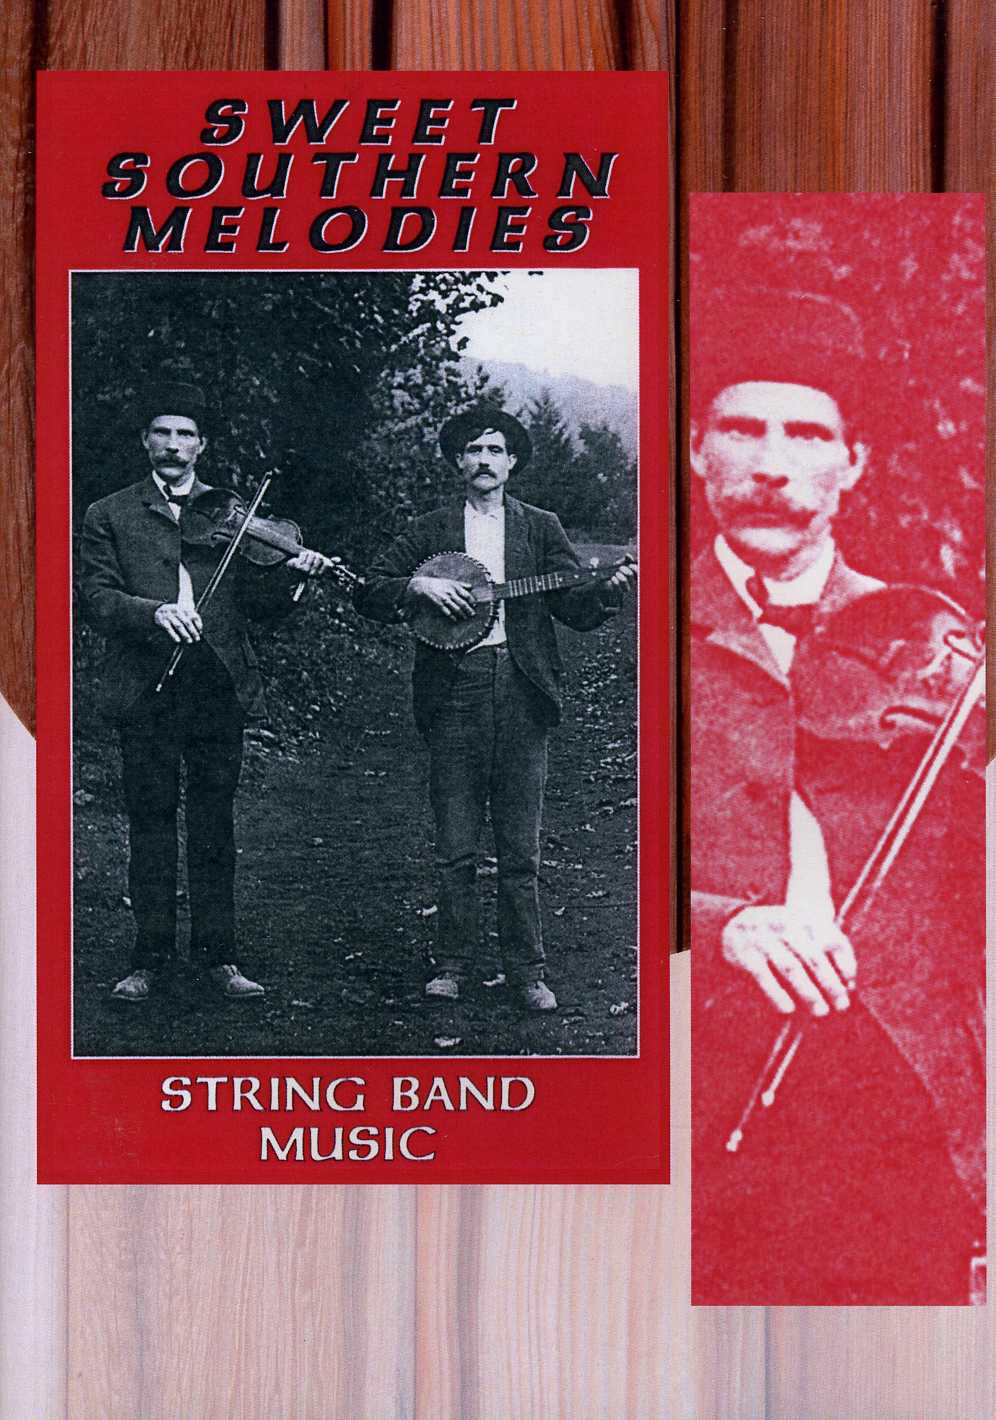 SWEET SOUTHERN MELODIES: STRING BAND MUSIC